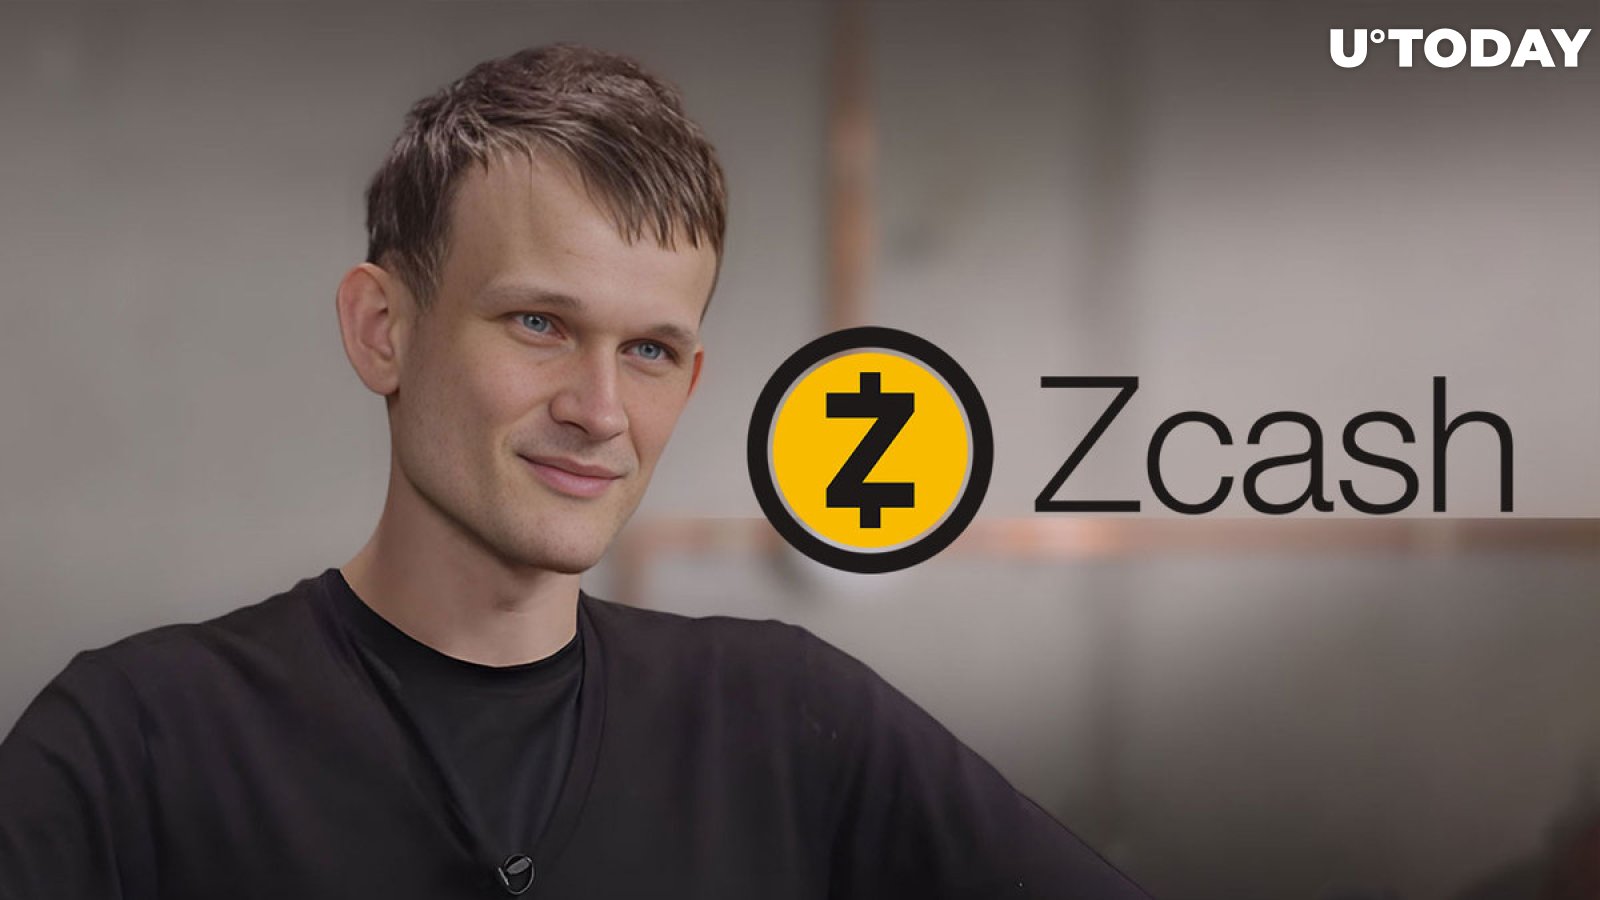 Vitalik Buterin Reveals His Views on Privacy-Oriented ZCash Project